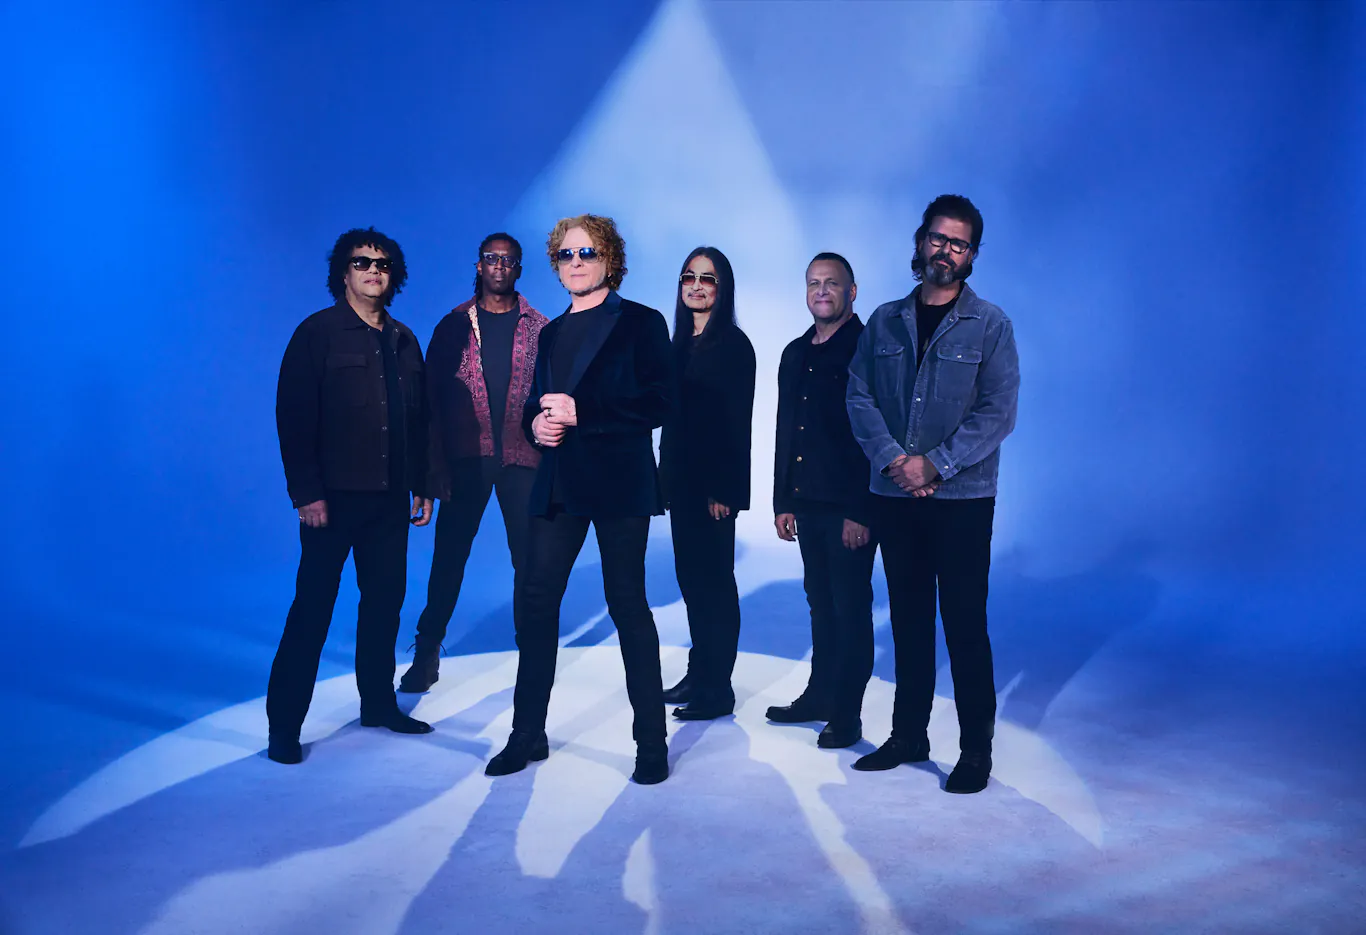 SIMPLY RED return with new single ‘Better With You’ & announce new album ‘Time’